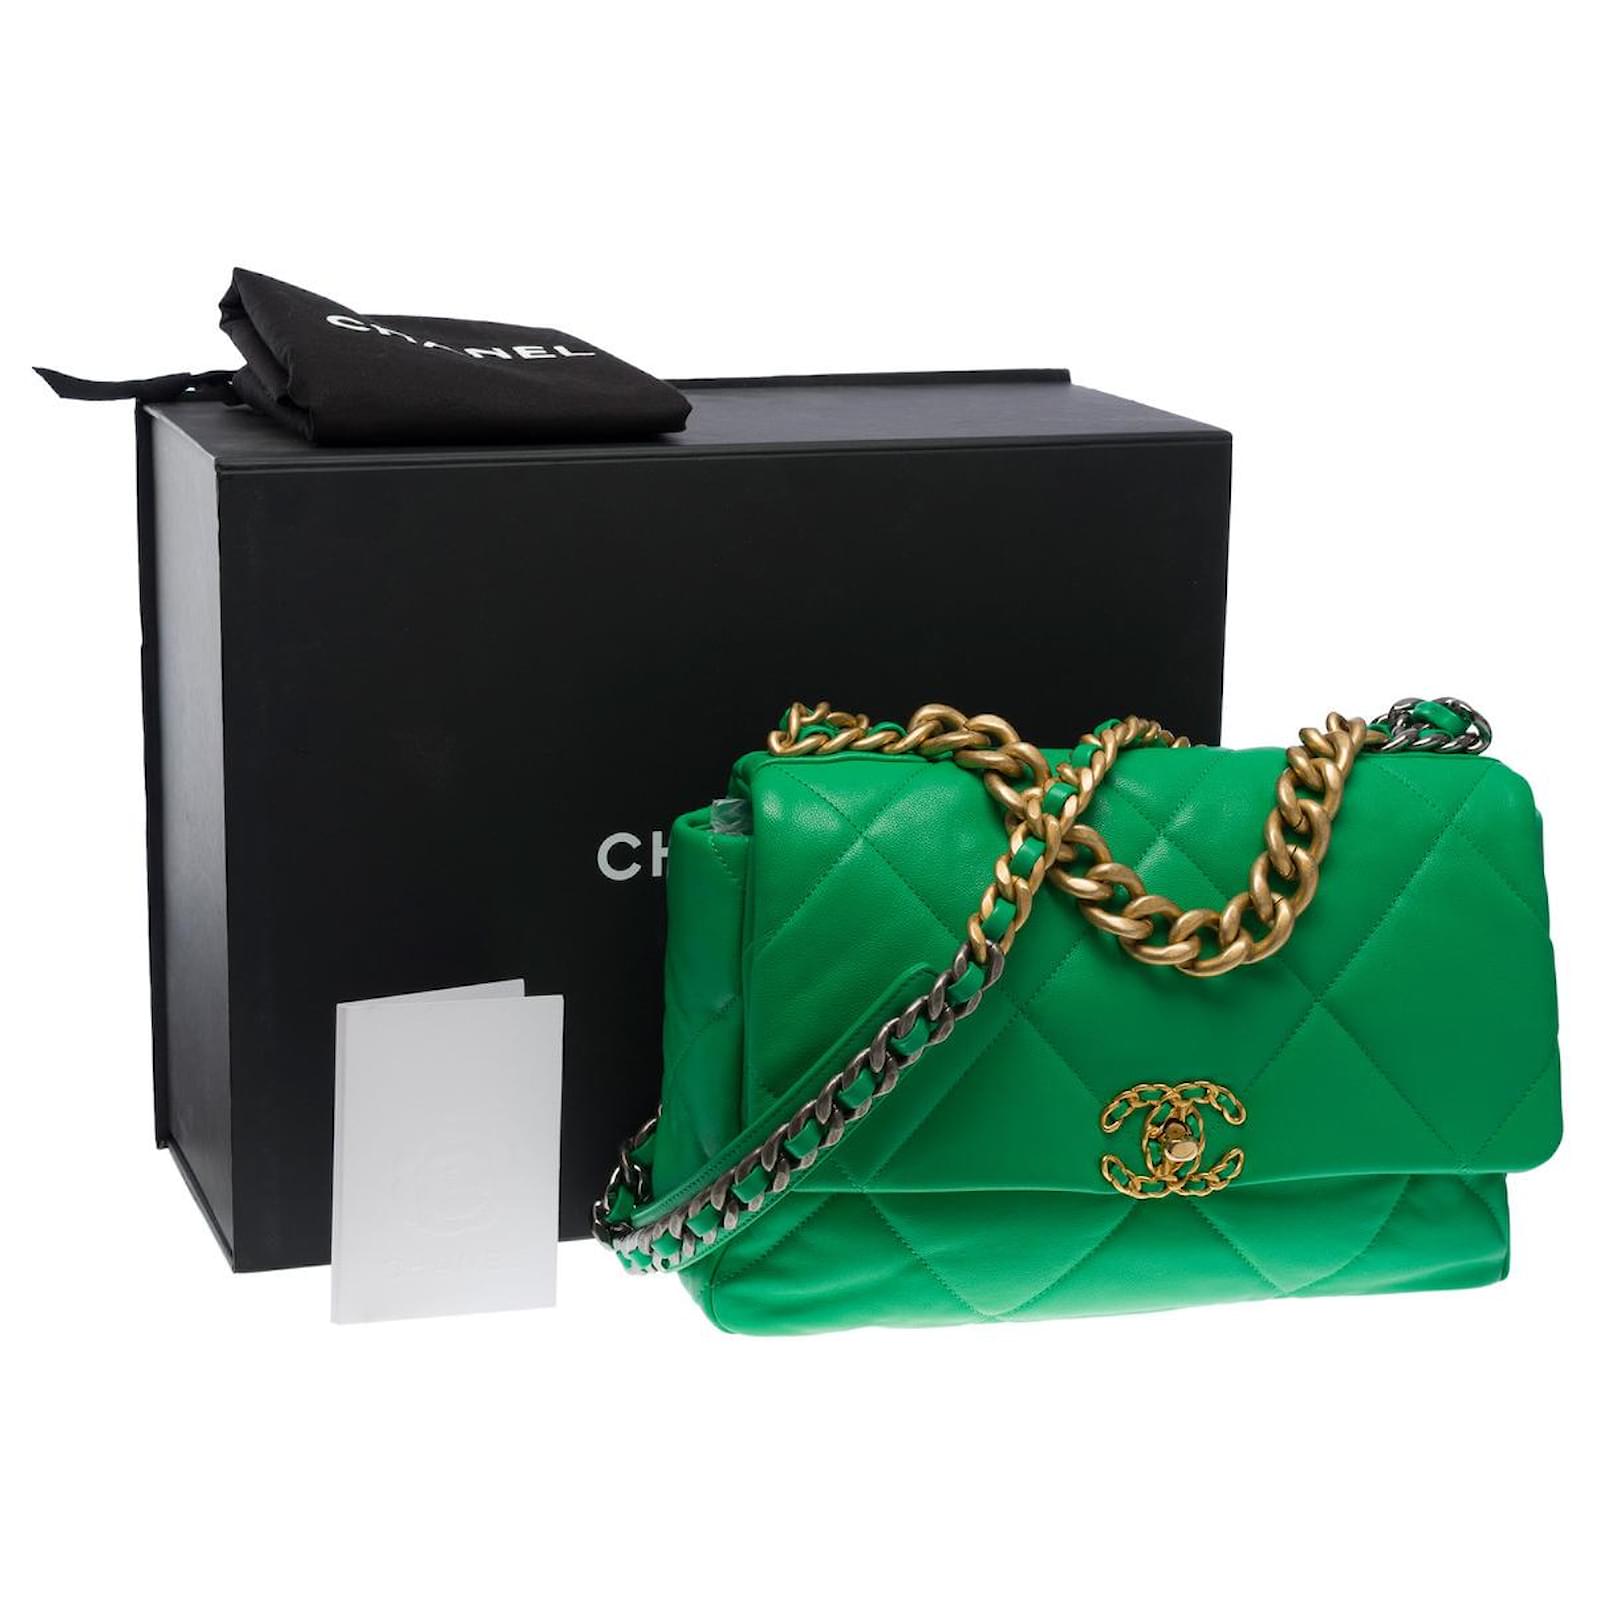 Chanel 19 leather handbag Chanel Green in Leather - 35413700